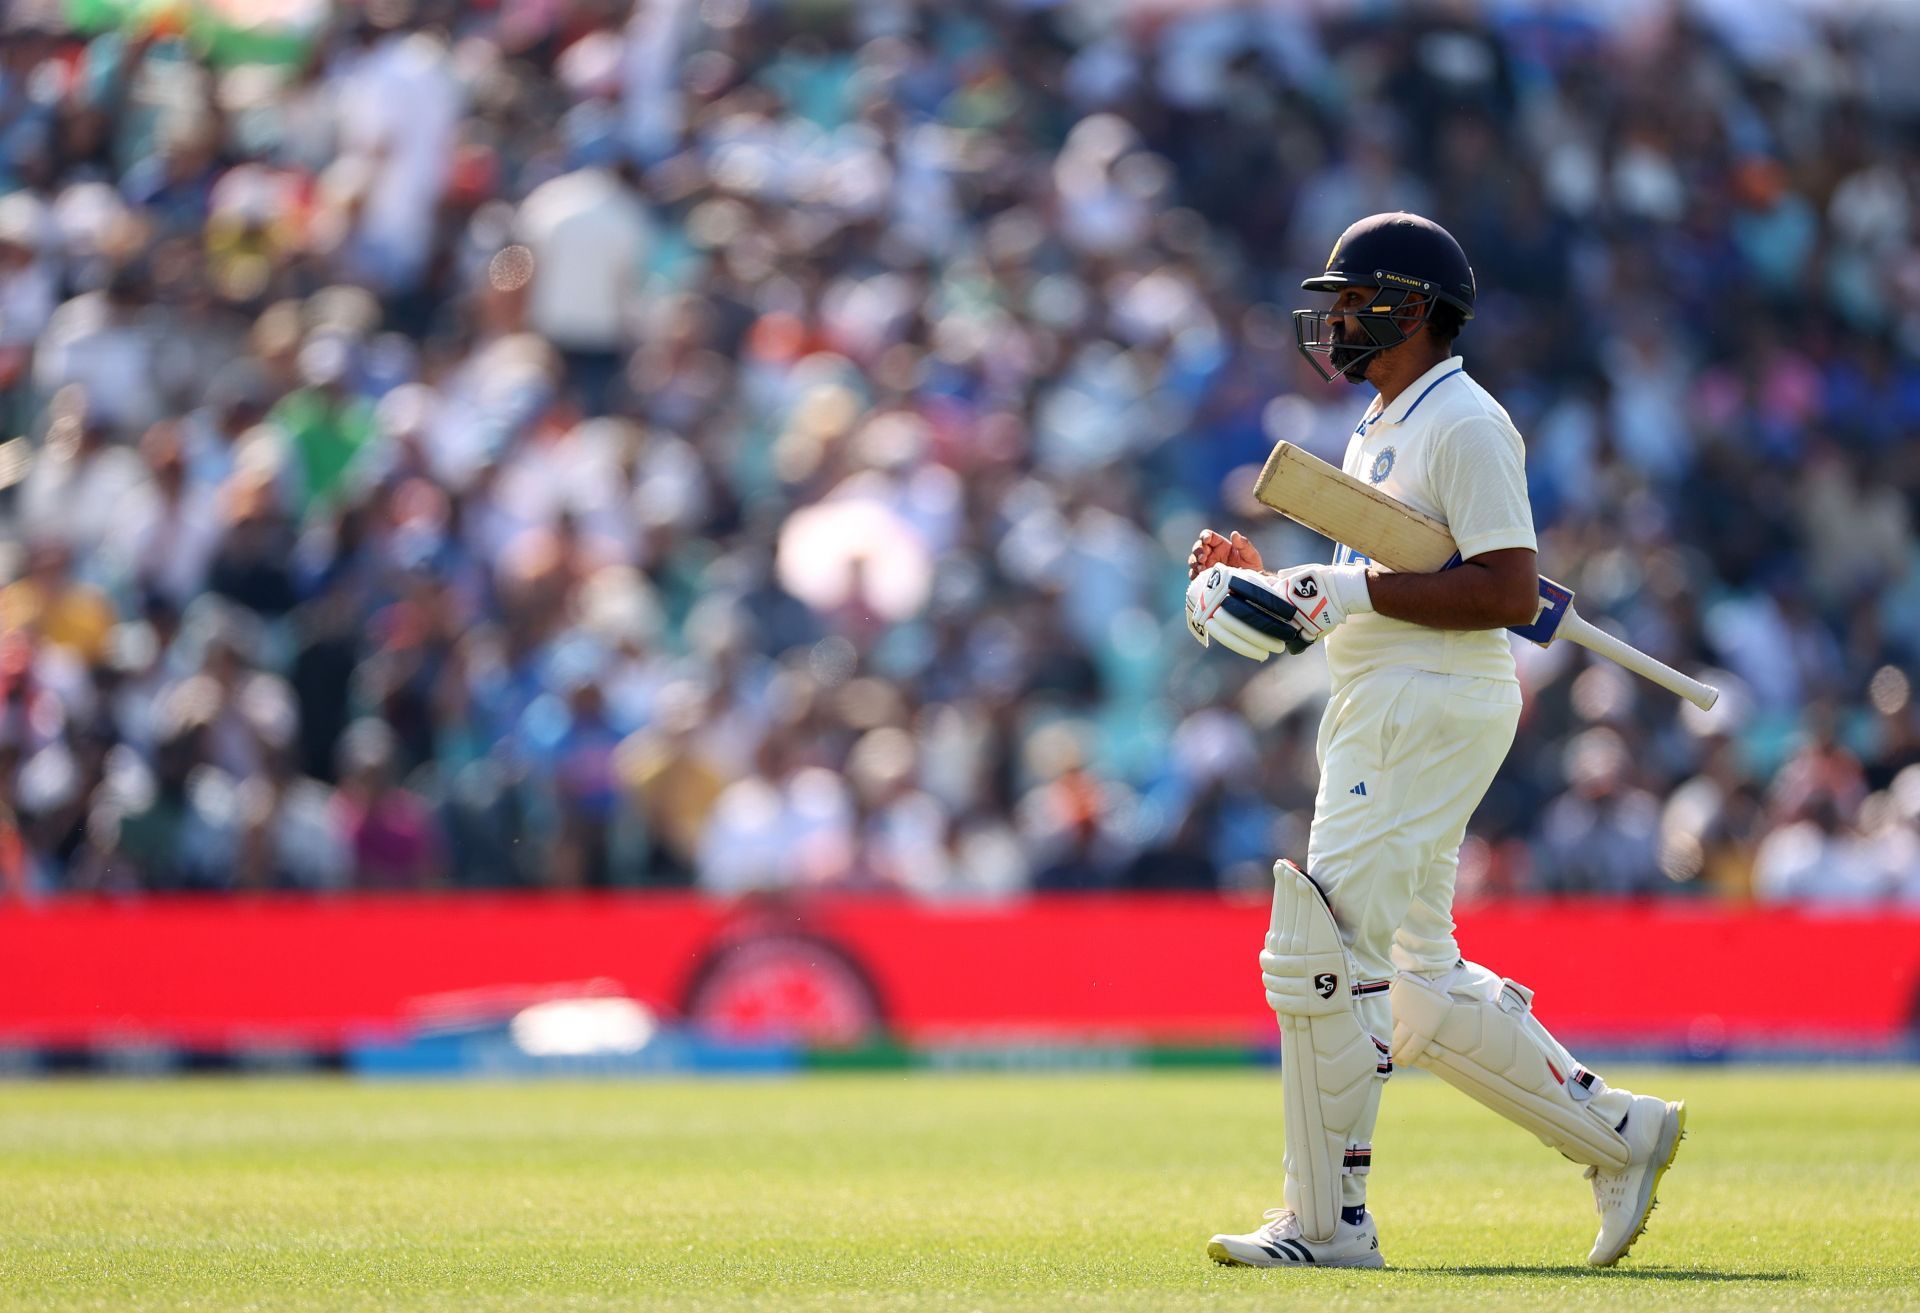 Rohit Sharma has failed to convert starts in the WTC finals. (Pic: Getty Images)